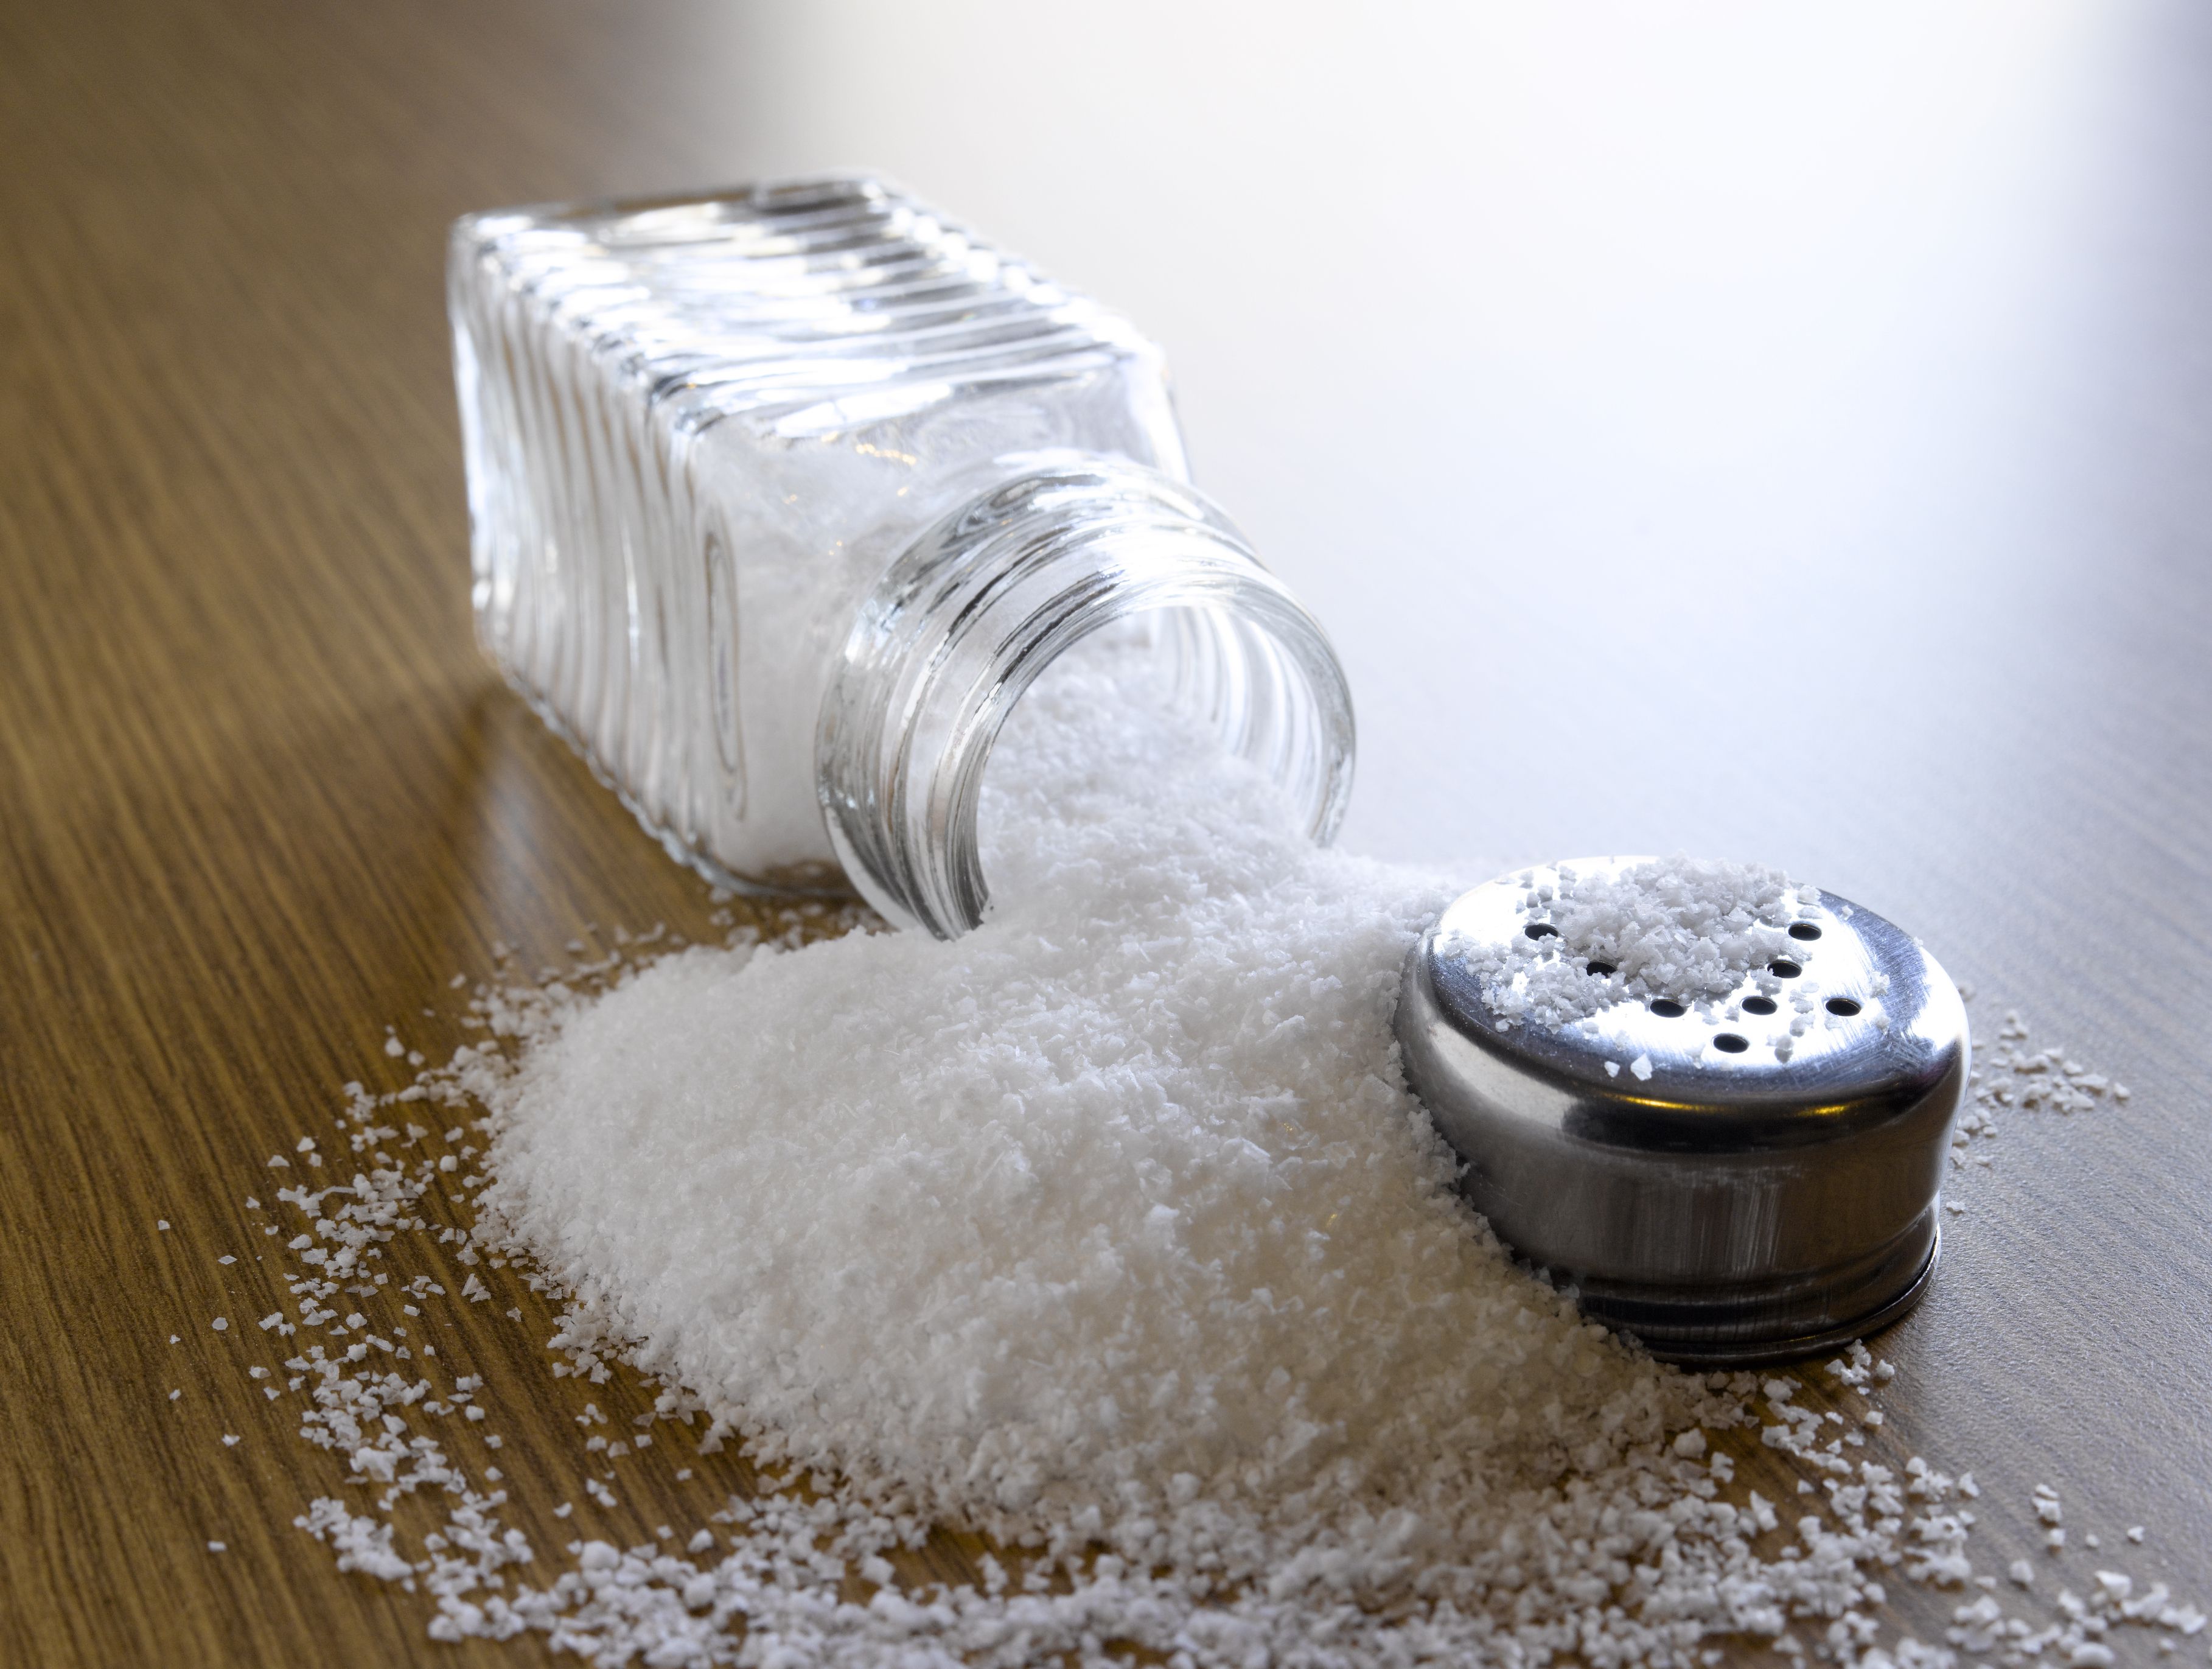 is the chemical compound of common kitchen table condiment salt